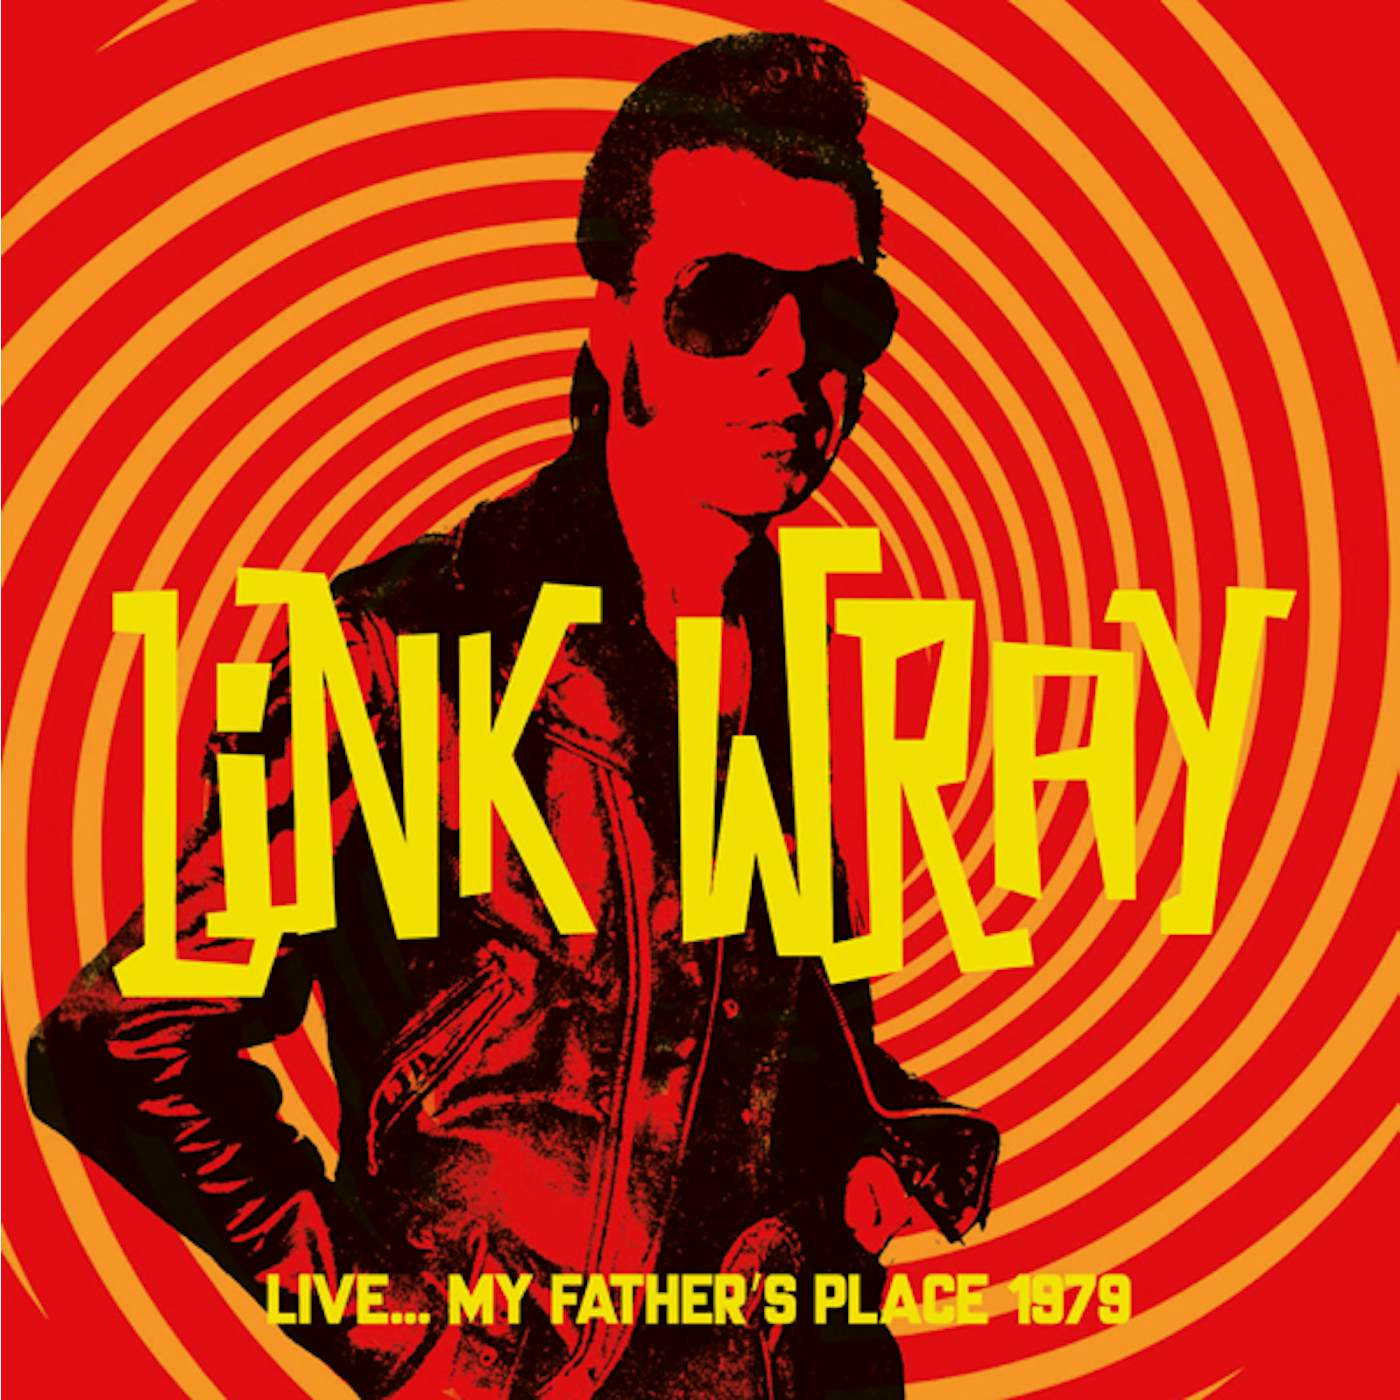 Link Wray LIVE... MY FATHER'S PLACE 1979 CD